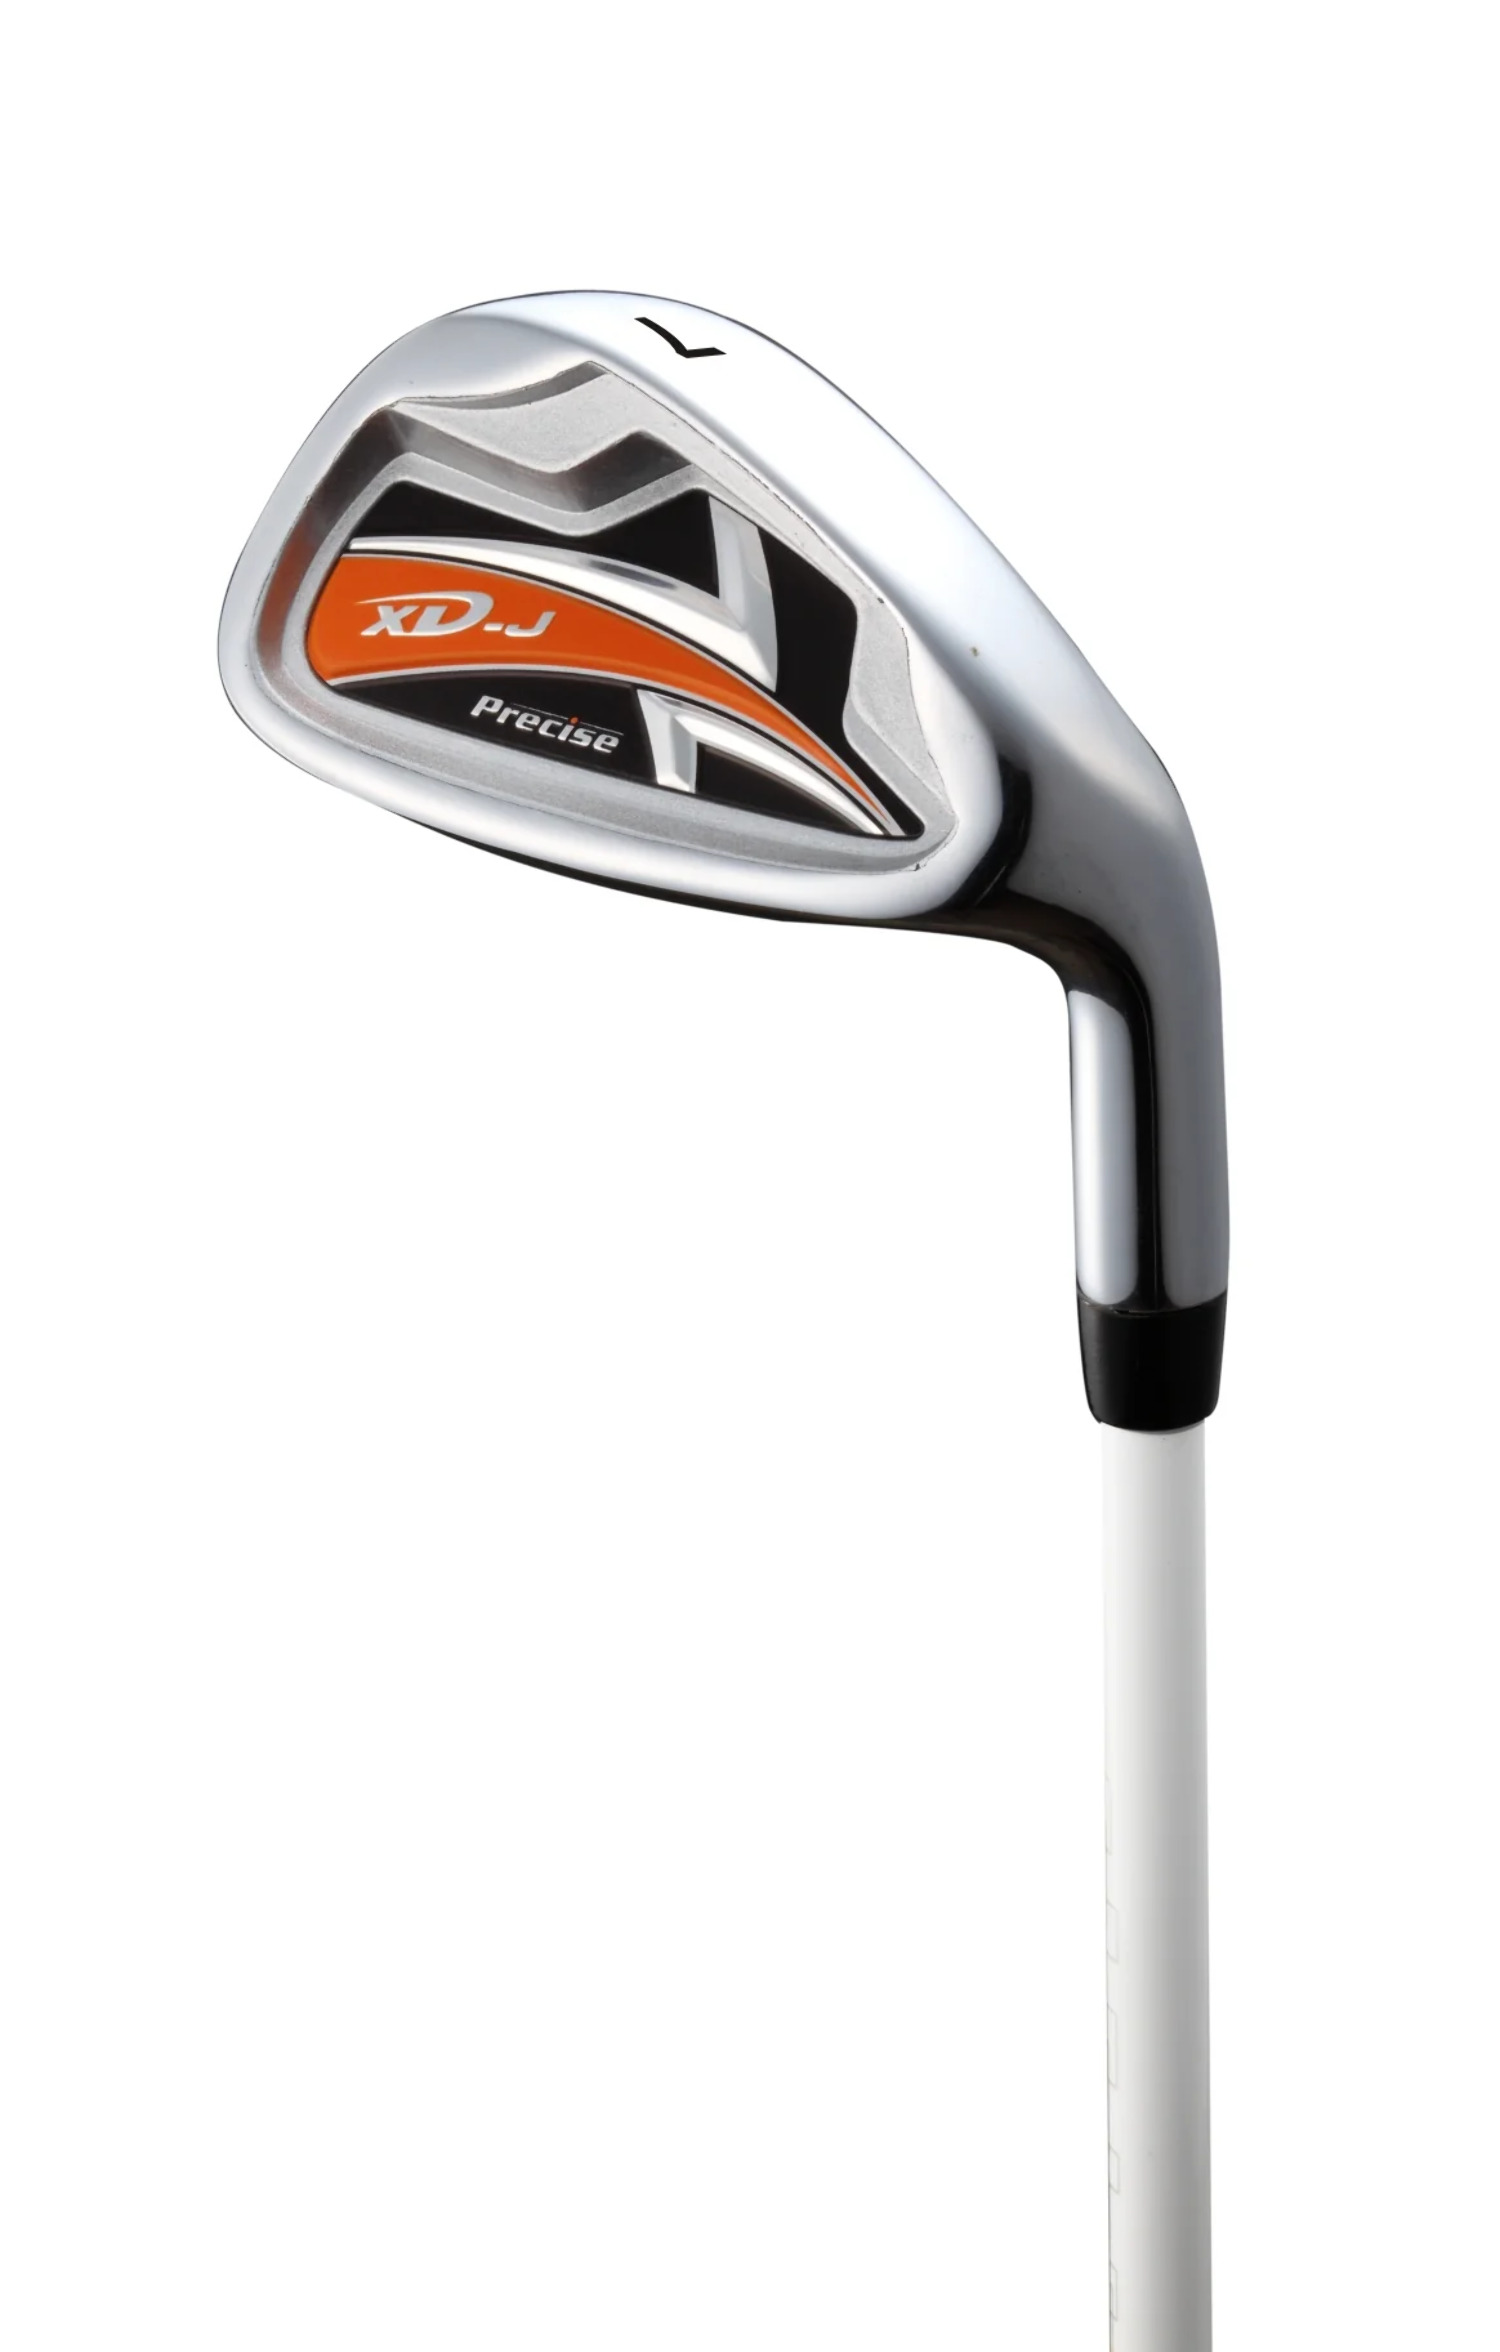 Precise XD-J Junior Complete Golf Club Set for Children Kids - 3 Age Groups Boys & Girls - Right Hand & Left Hand! - image 5 of 11